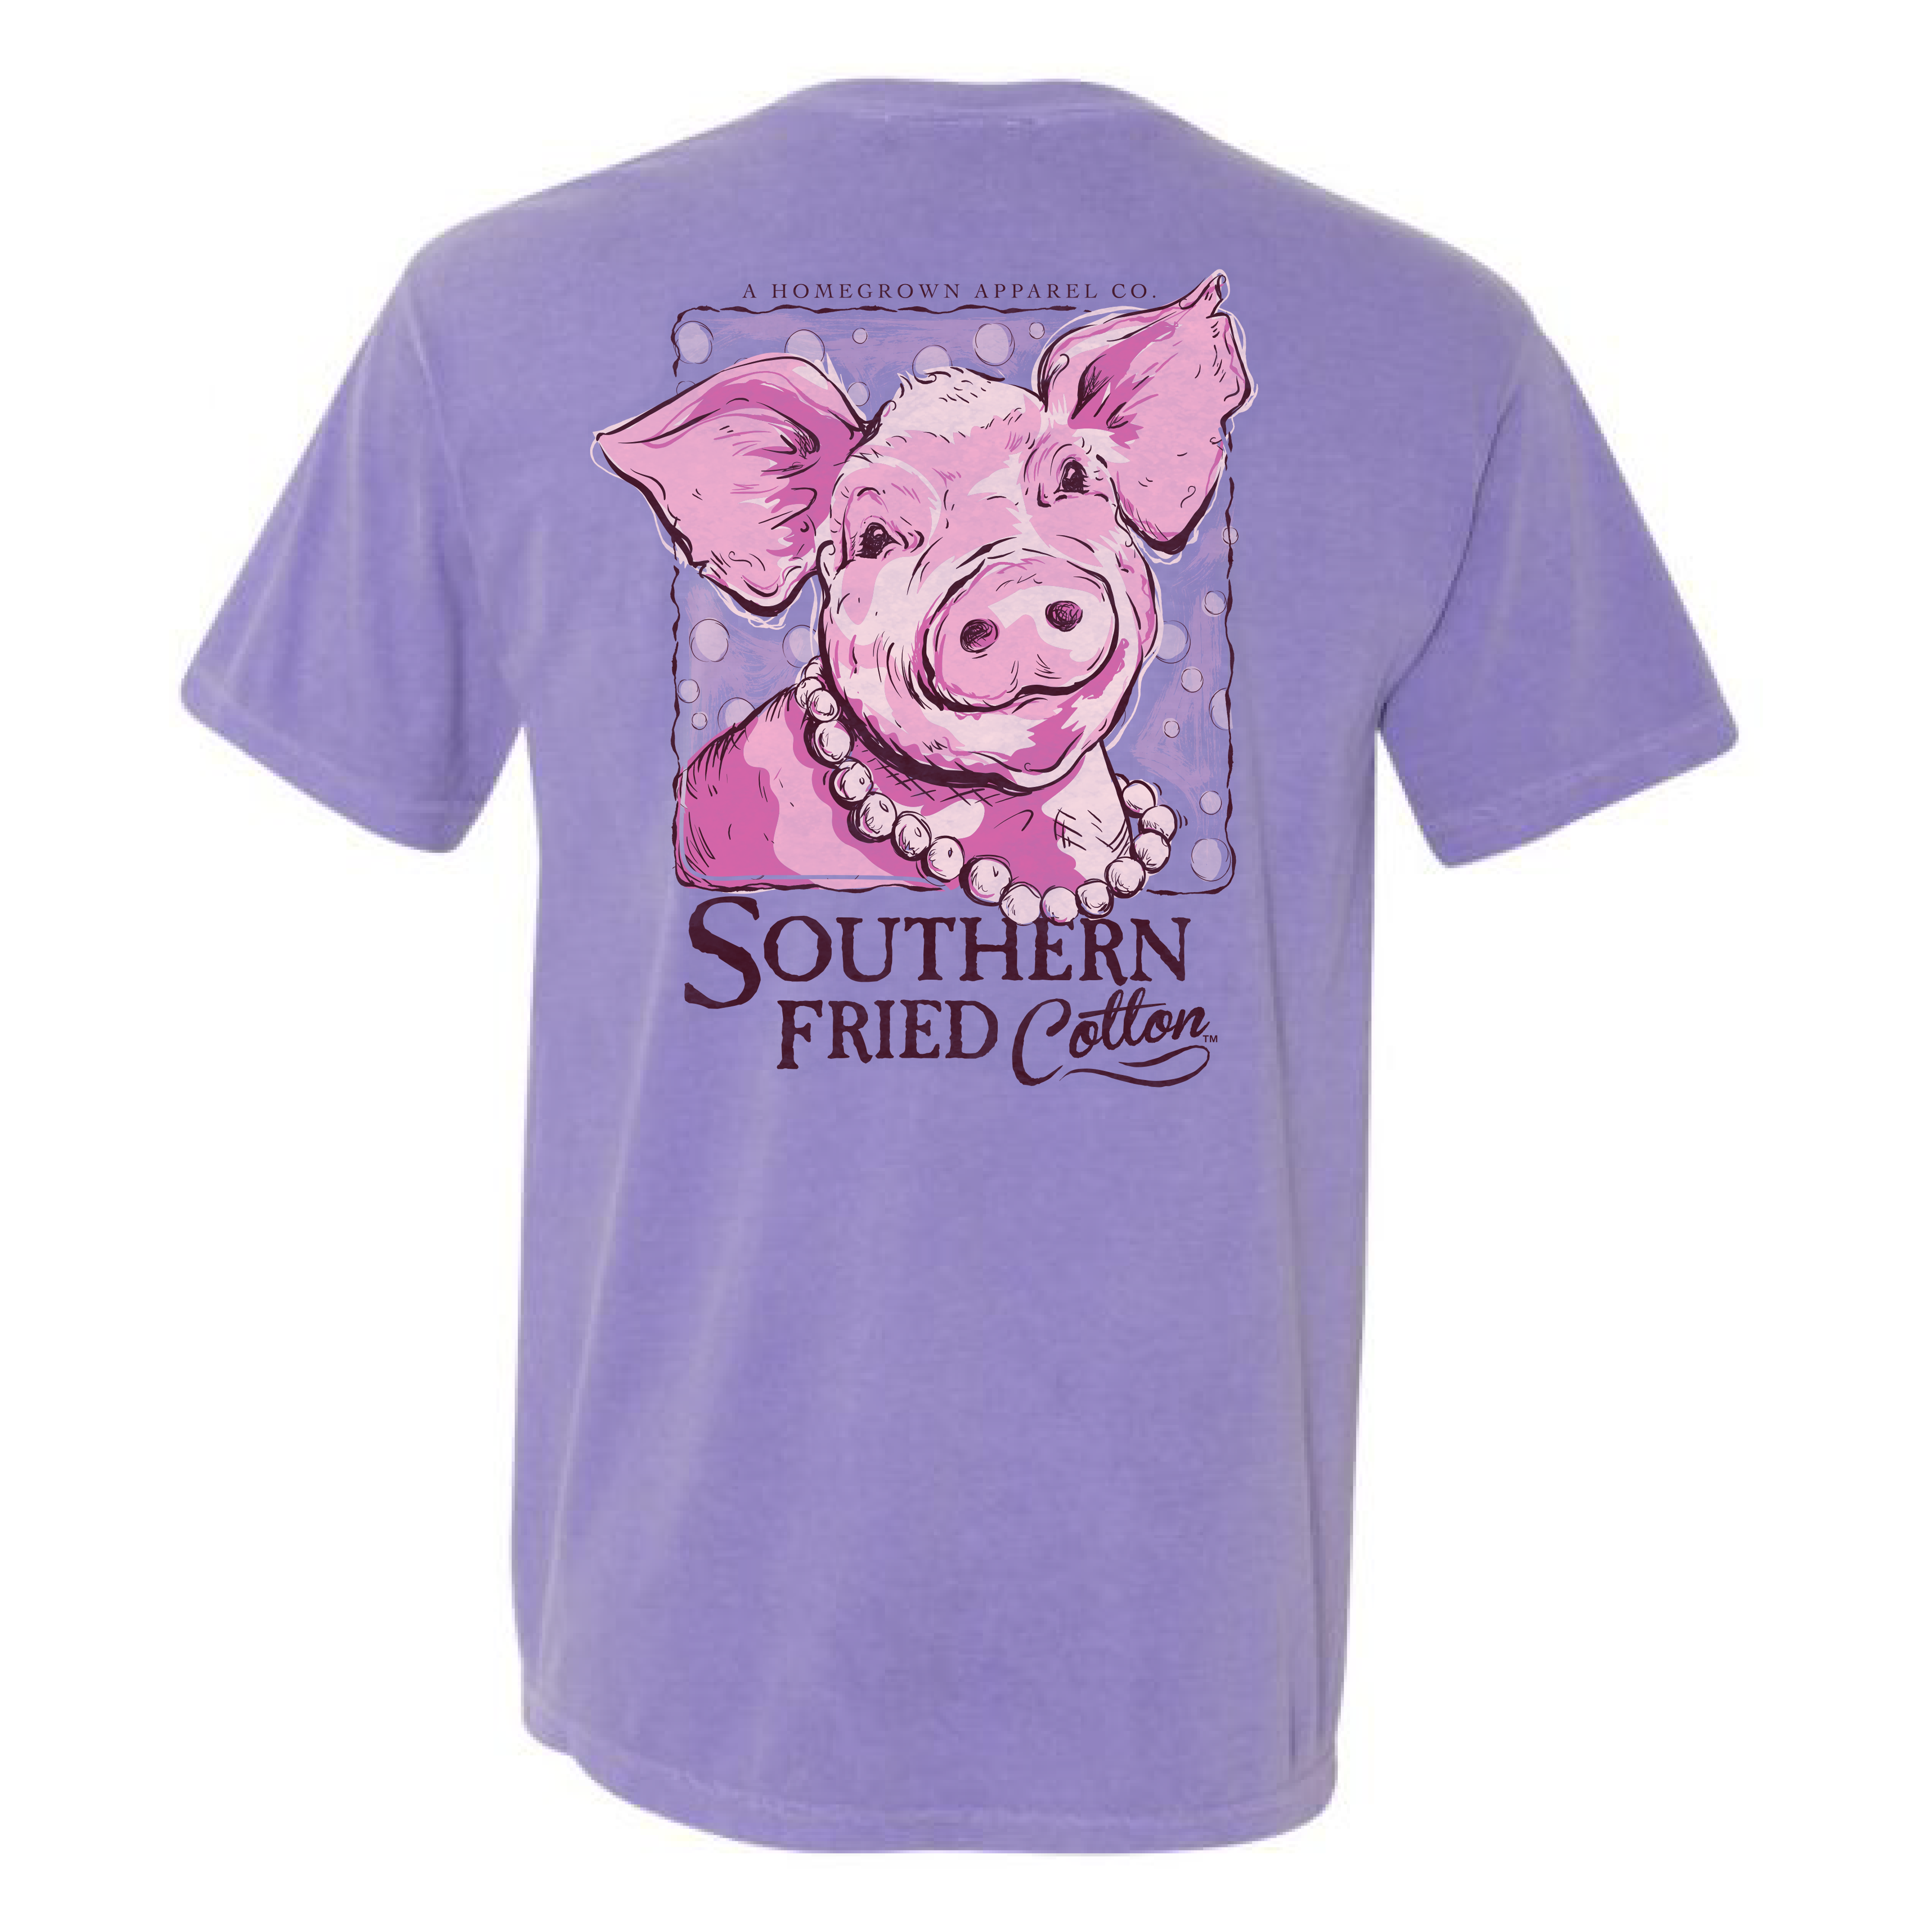 Southern Fried Cotton Pretty in Pearls T-Shirt